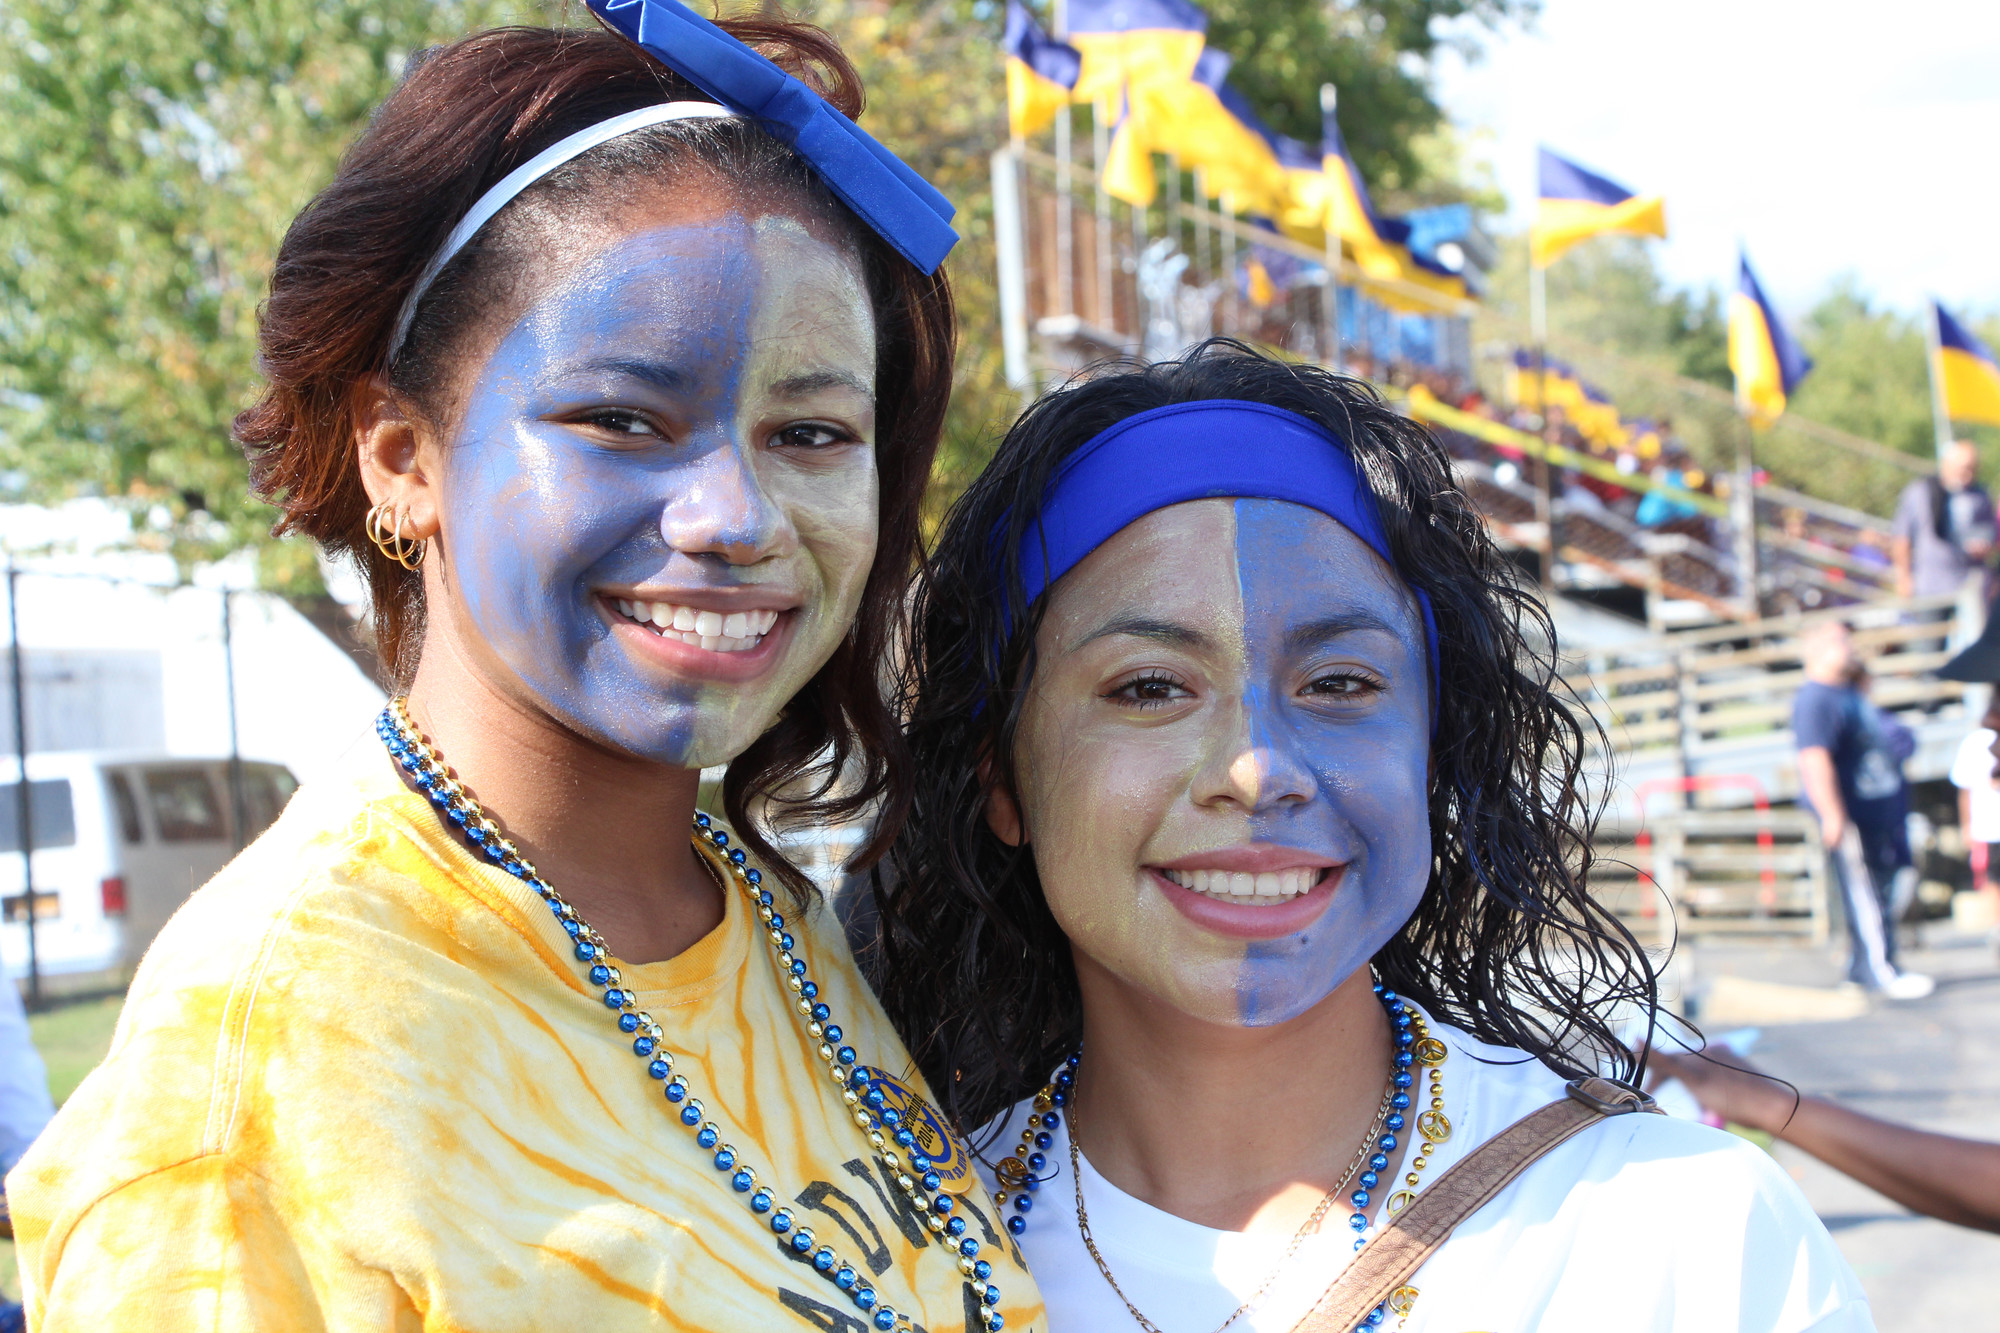 Students showed their School spirit during the Homecoming game.  Claudia Martines, 15, left, and Ashantis Jamieson,15, had their faces painted in the school’s colors, blue and gold.